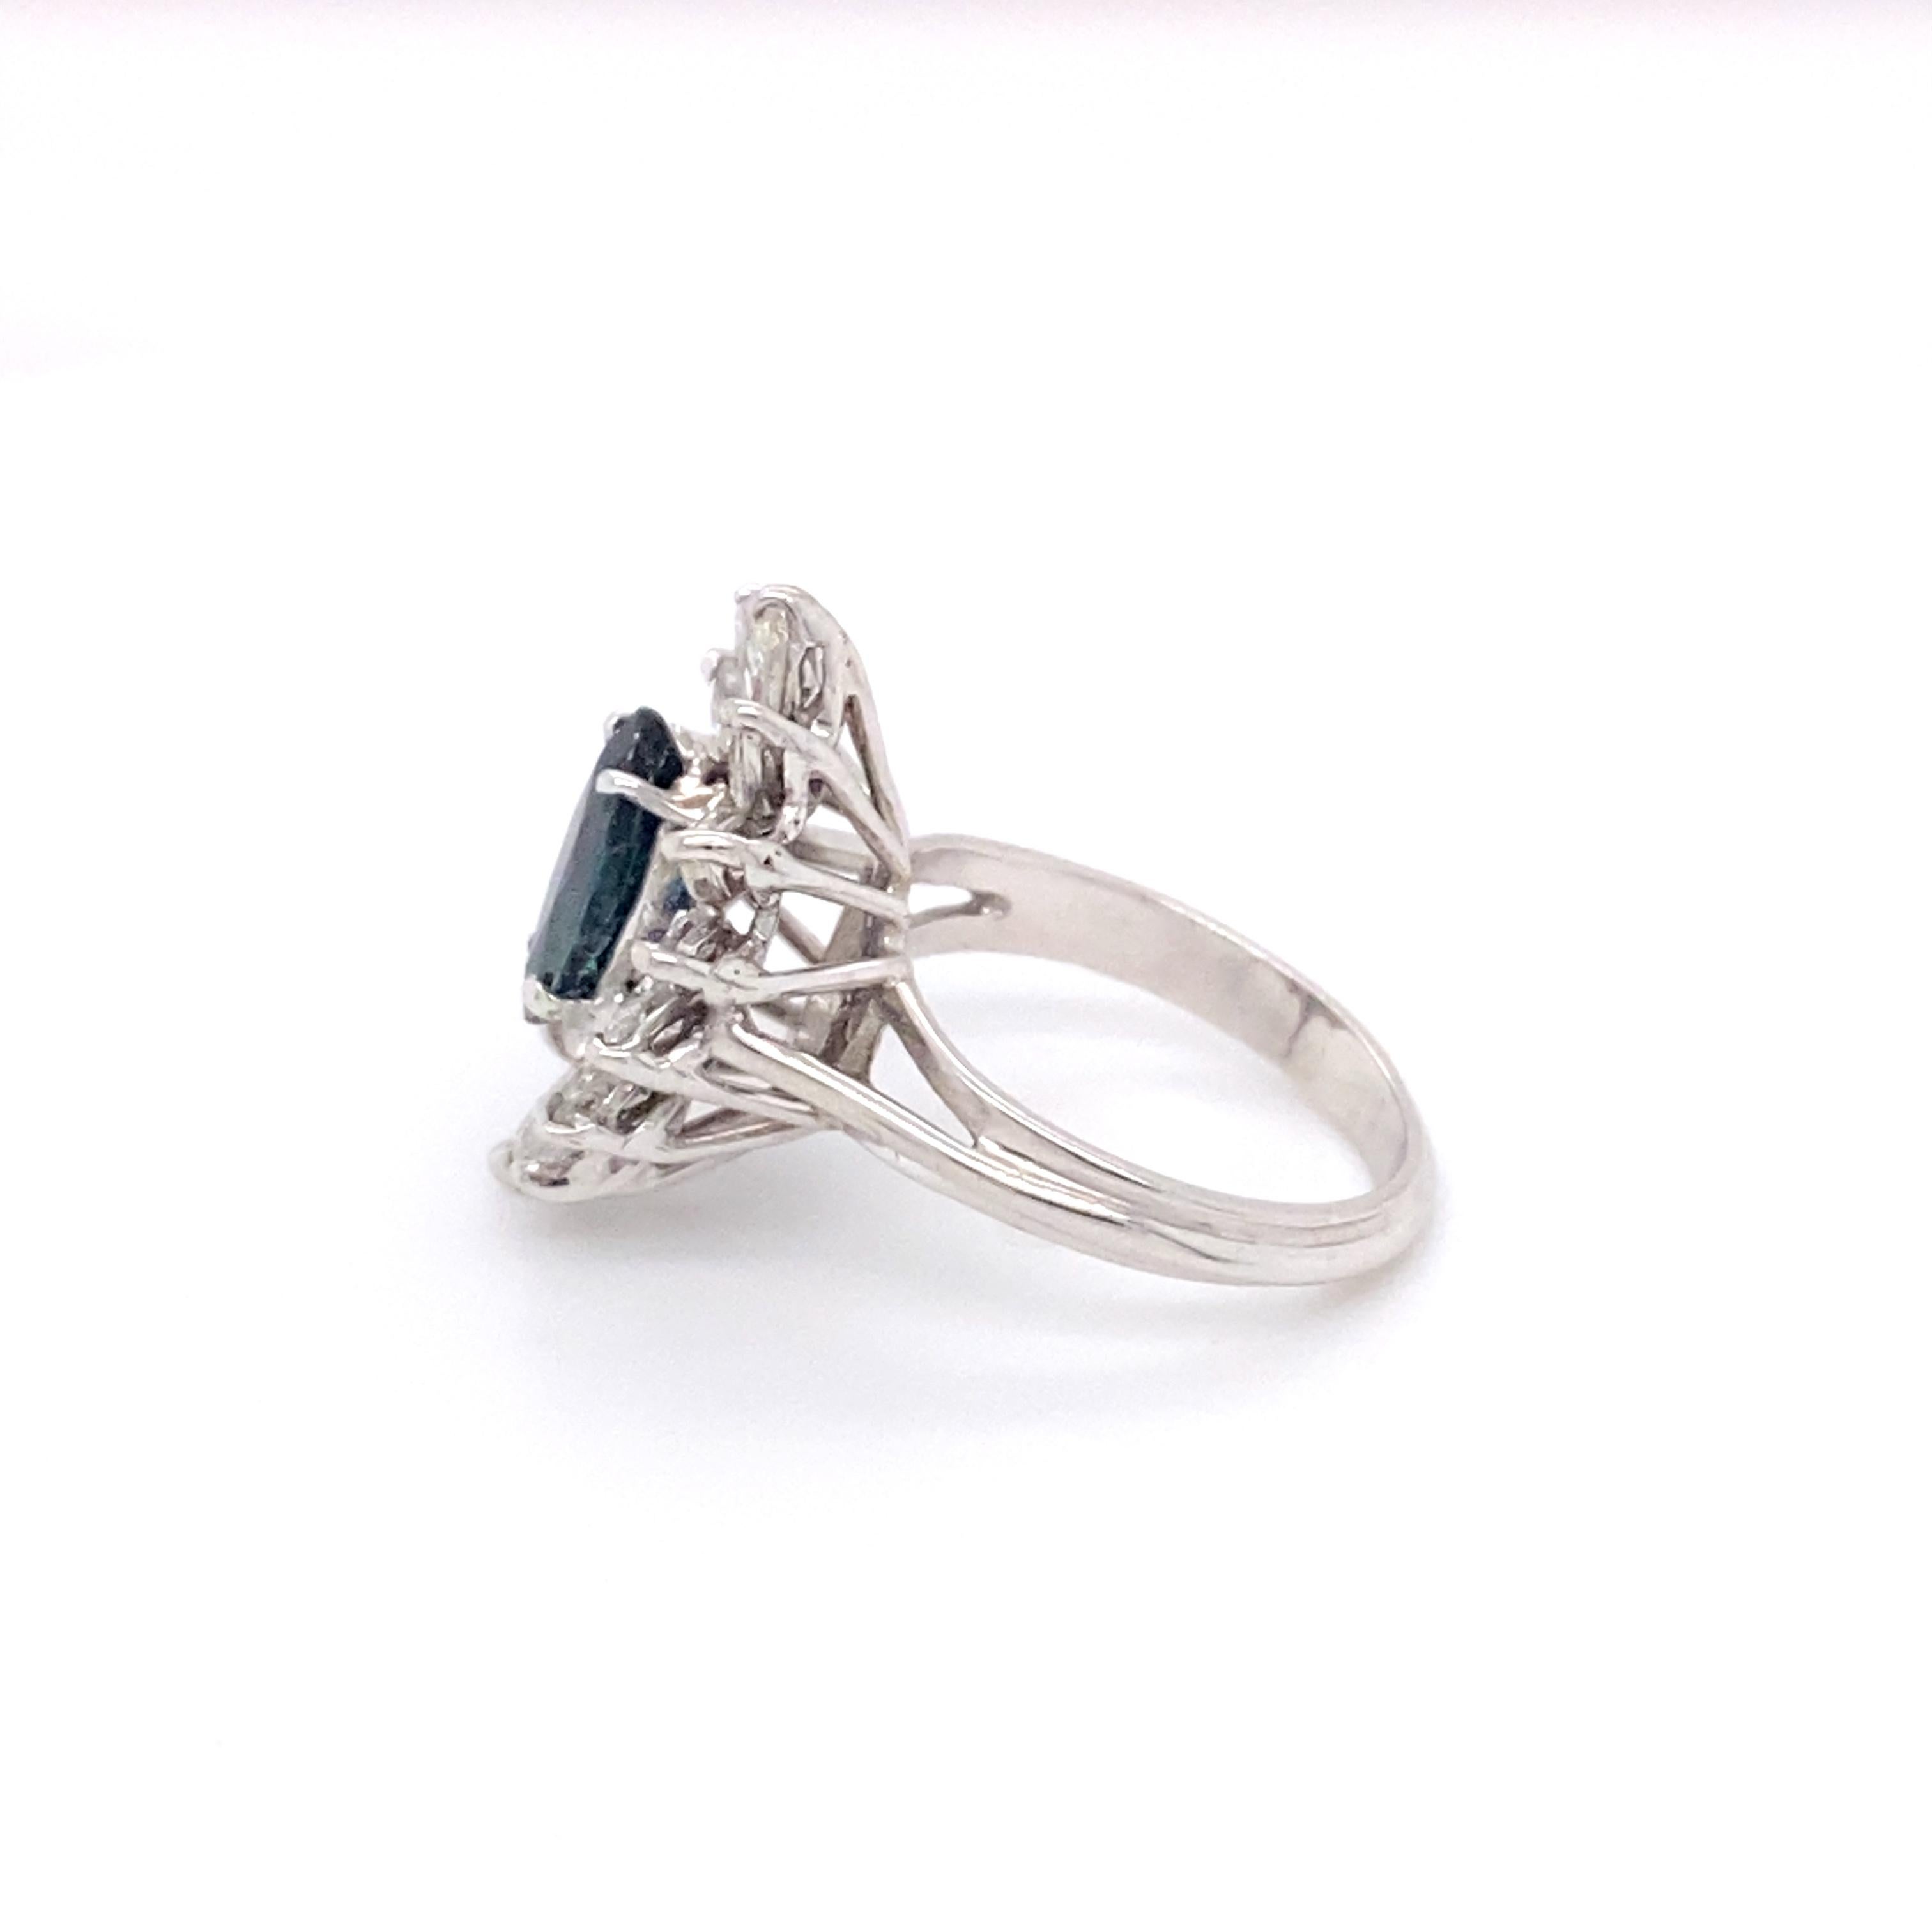 Marquise Cut 1950s 0.80 Carat Marquise Sapphire and 0.50 Carat Diamond Ring in 18K White Gold